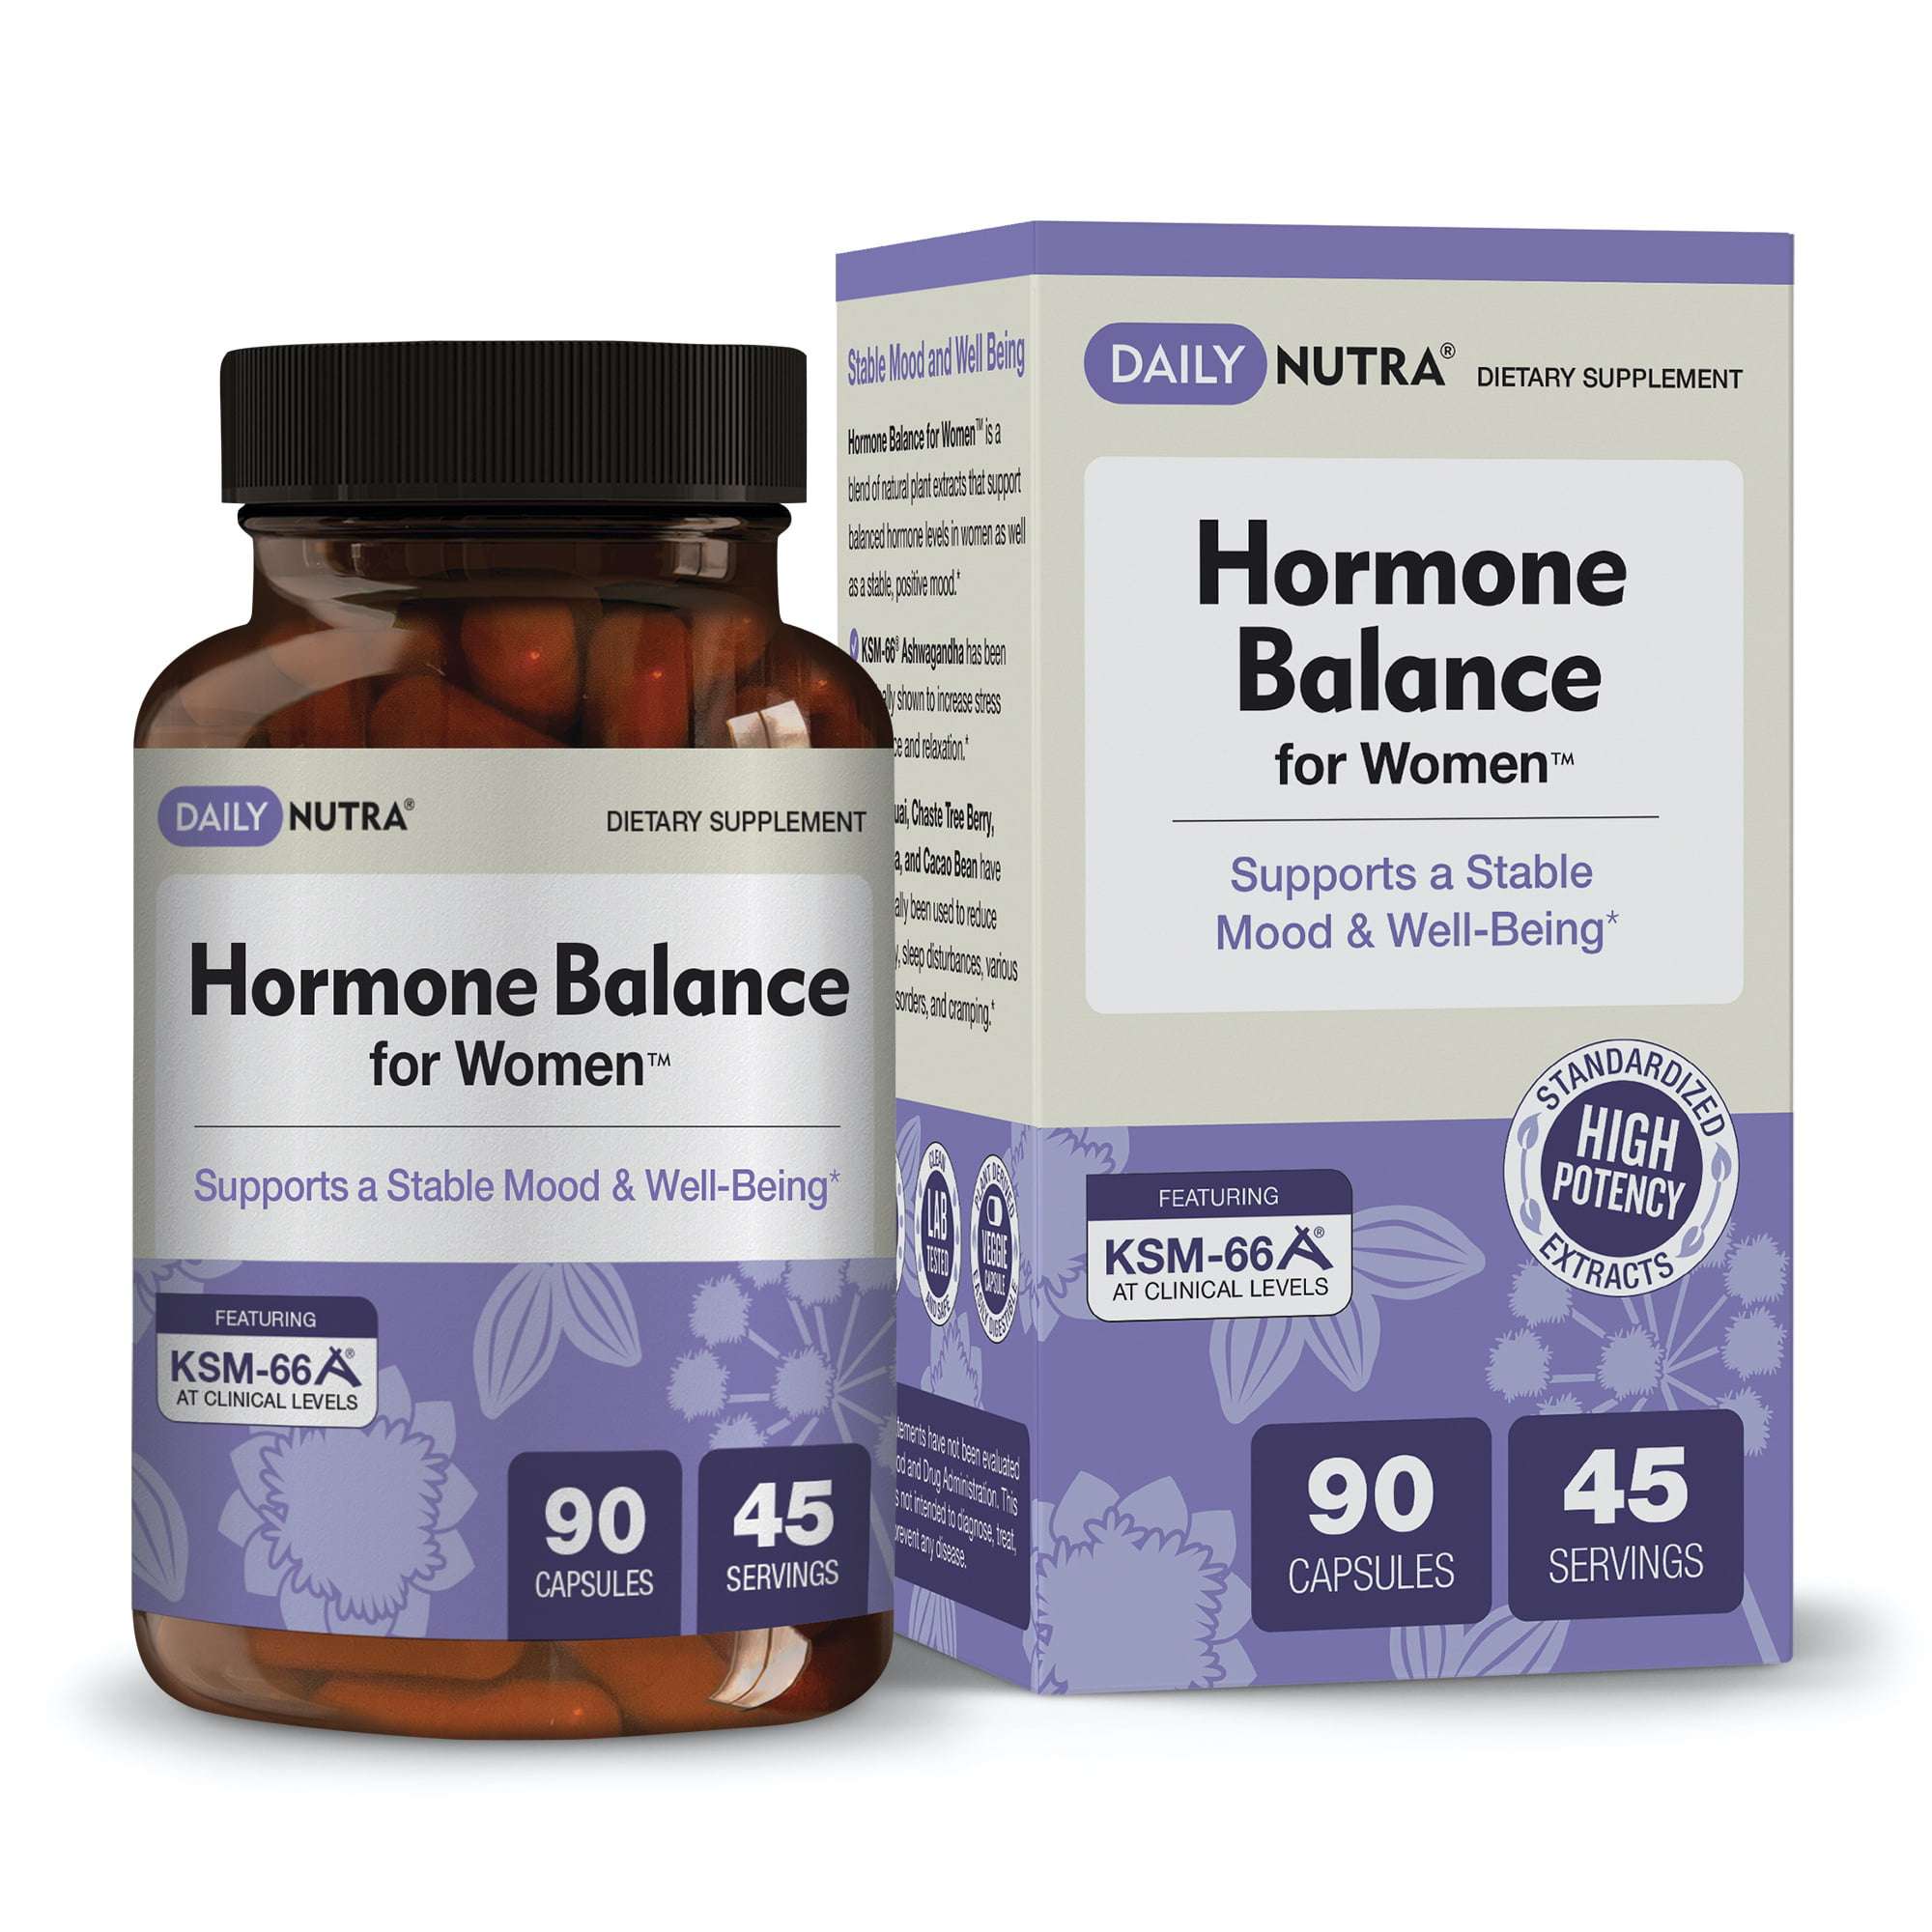 Hormone Balance for Women by DailyNutra